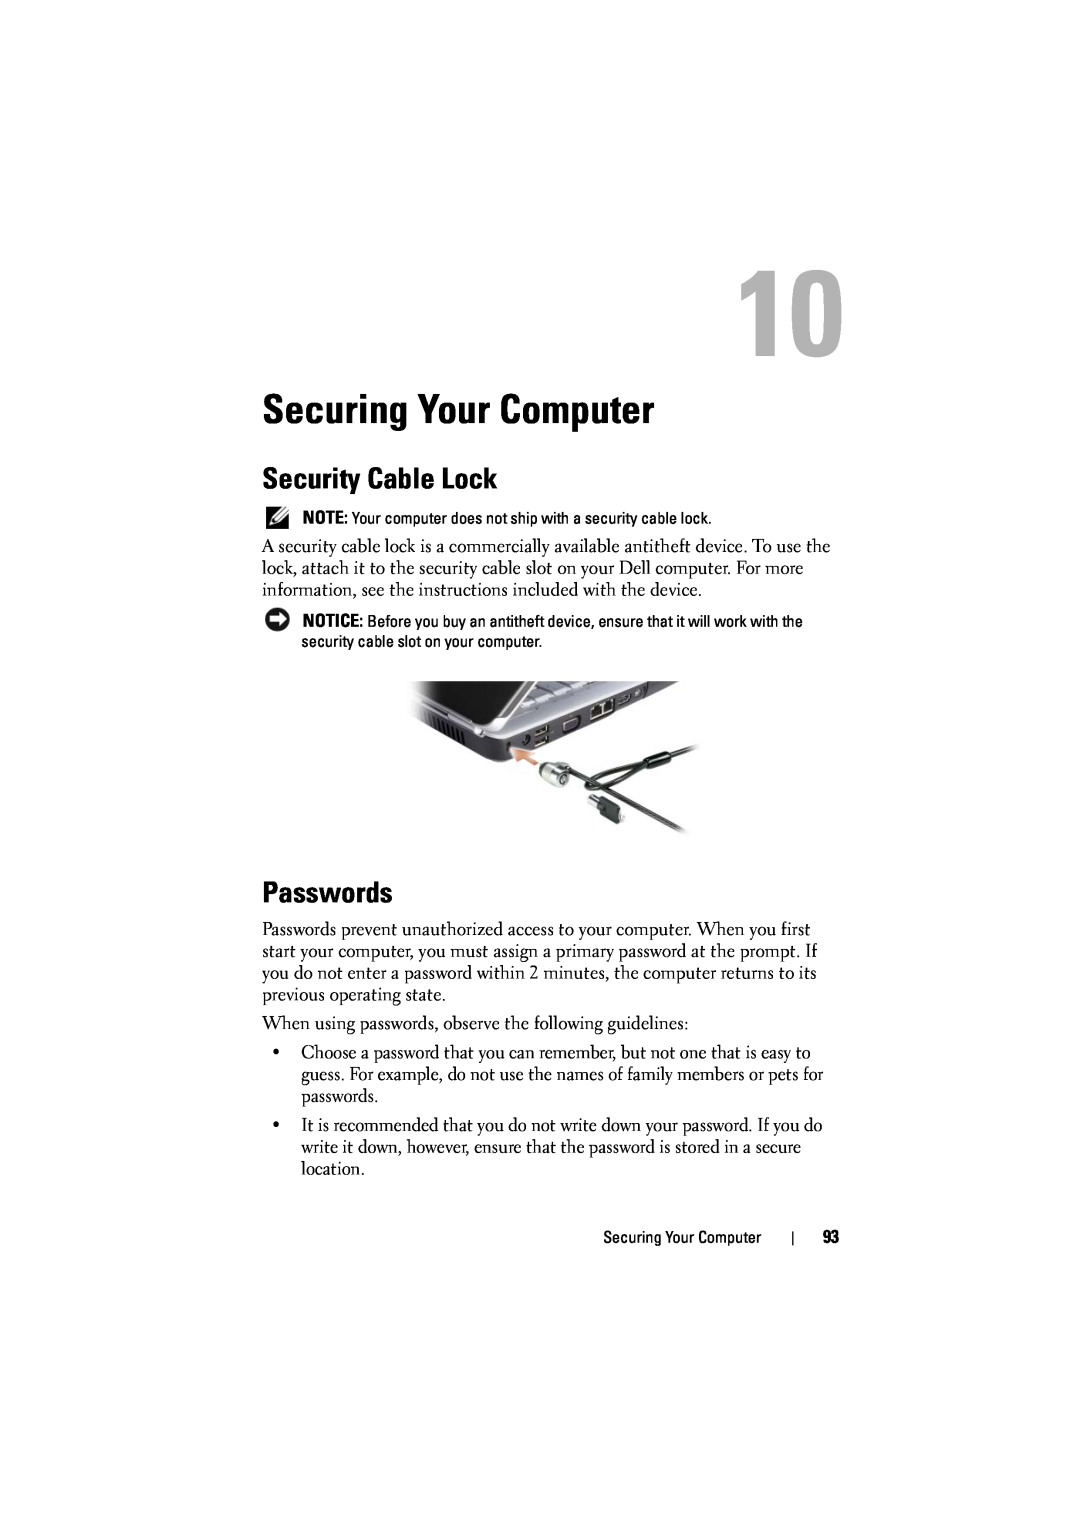 Dell 1526, 1525 owner manual Securing Your Computer, Security Cable Lock, Passwords 